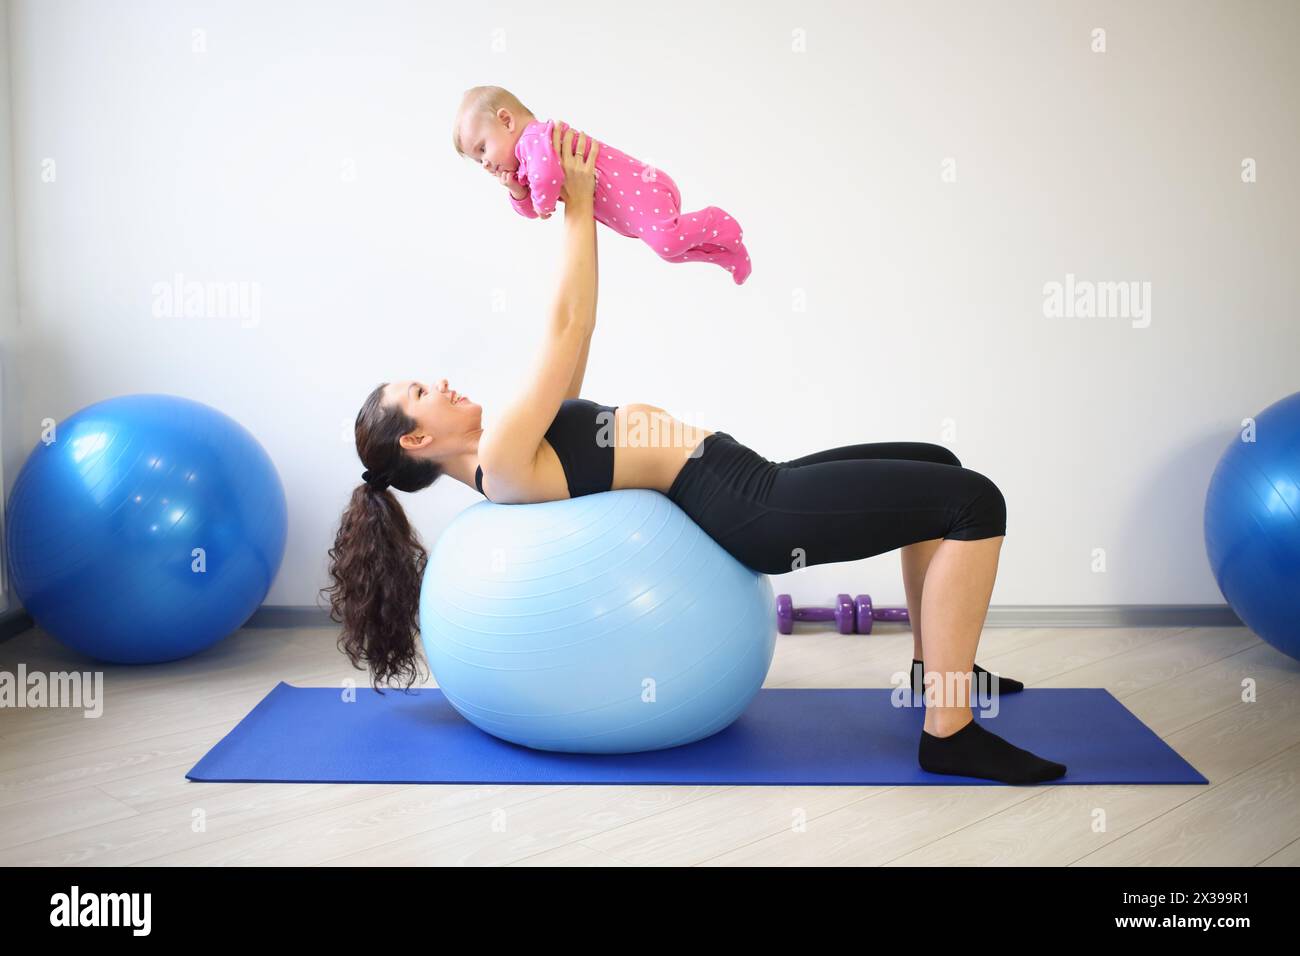 Happy woman lying on the big blue ball on her back lifted up smiling baby in the gym Stock Photo